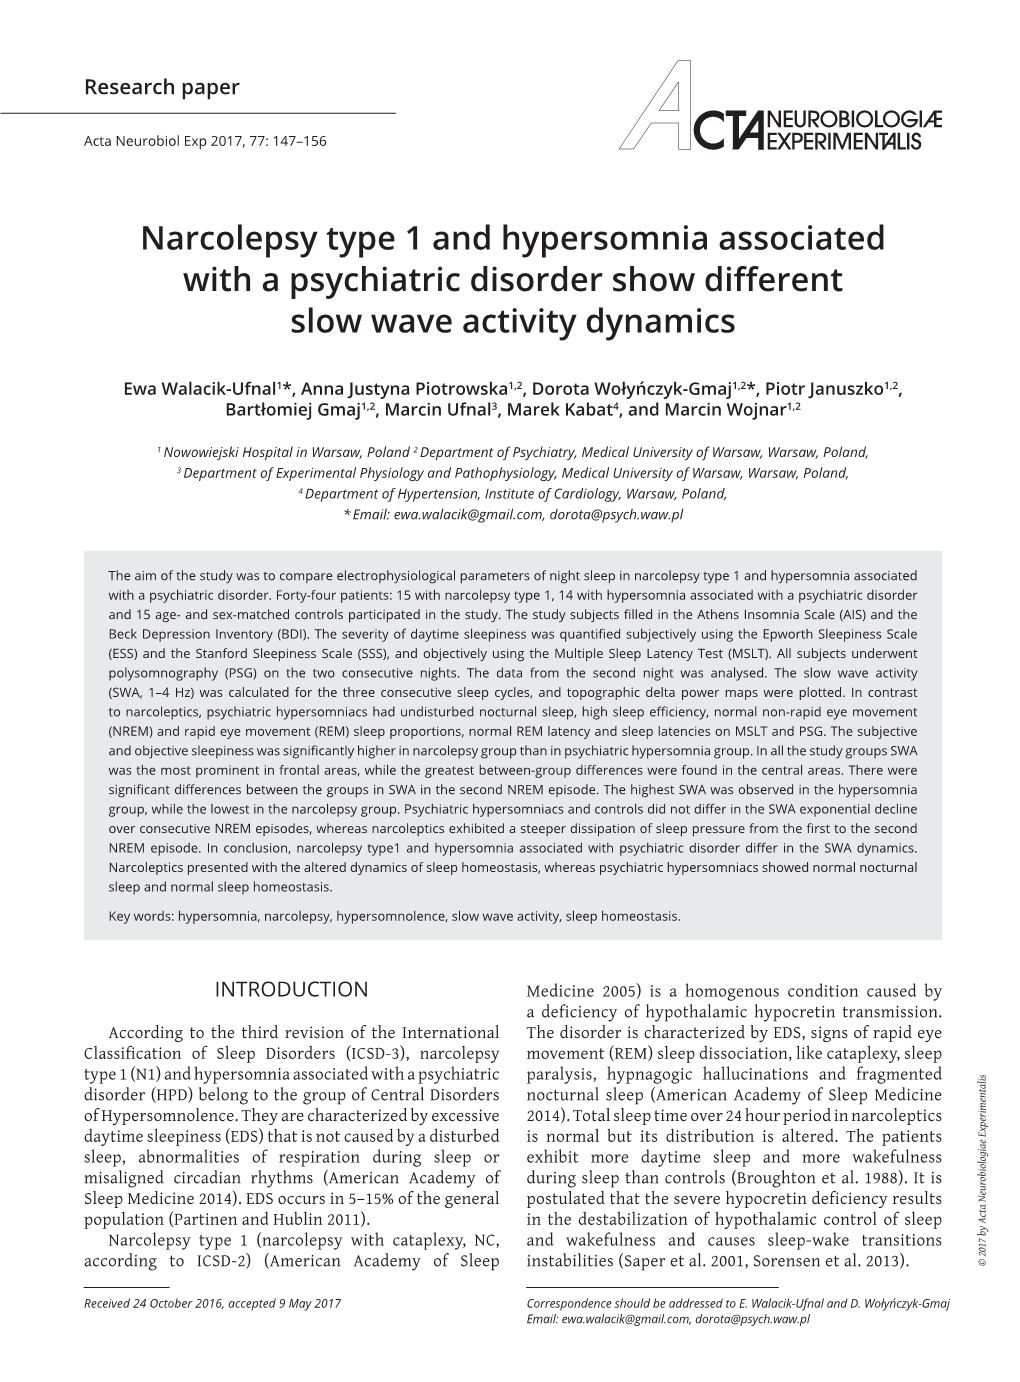 Narcolepsy Type 1 and Hypersomnia Associated with a Psychiatric